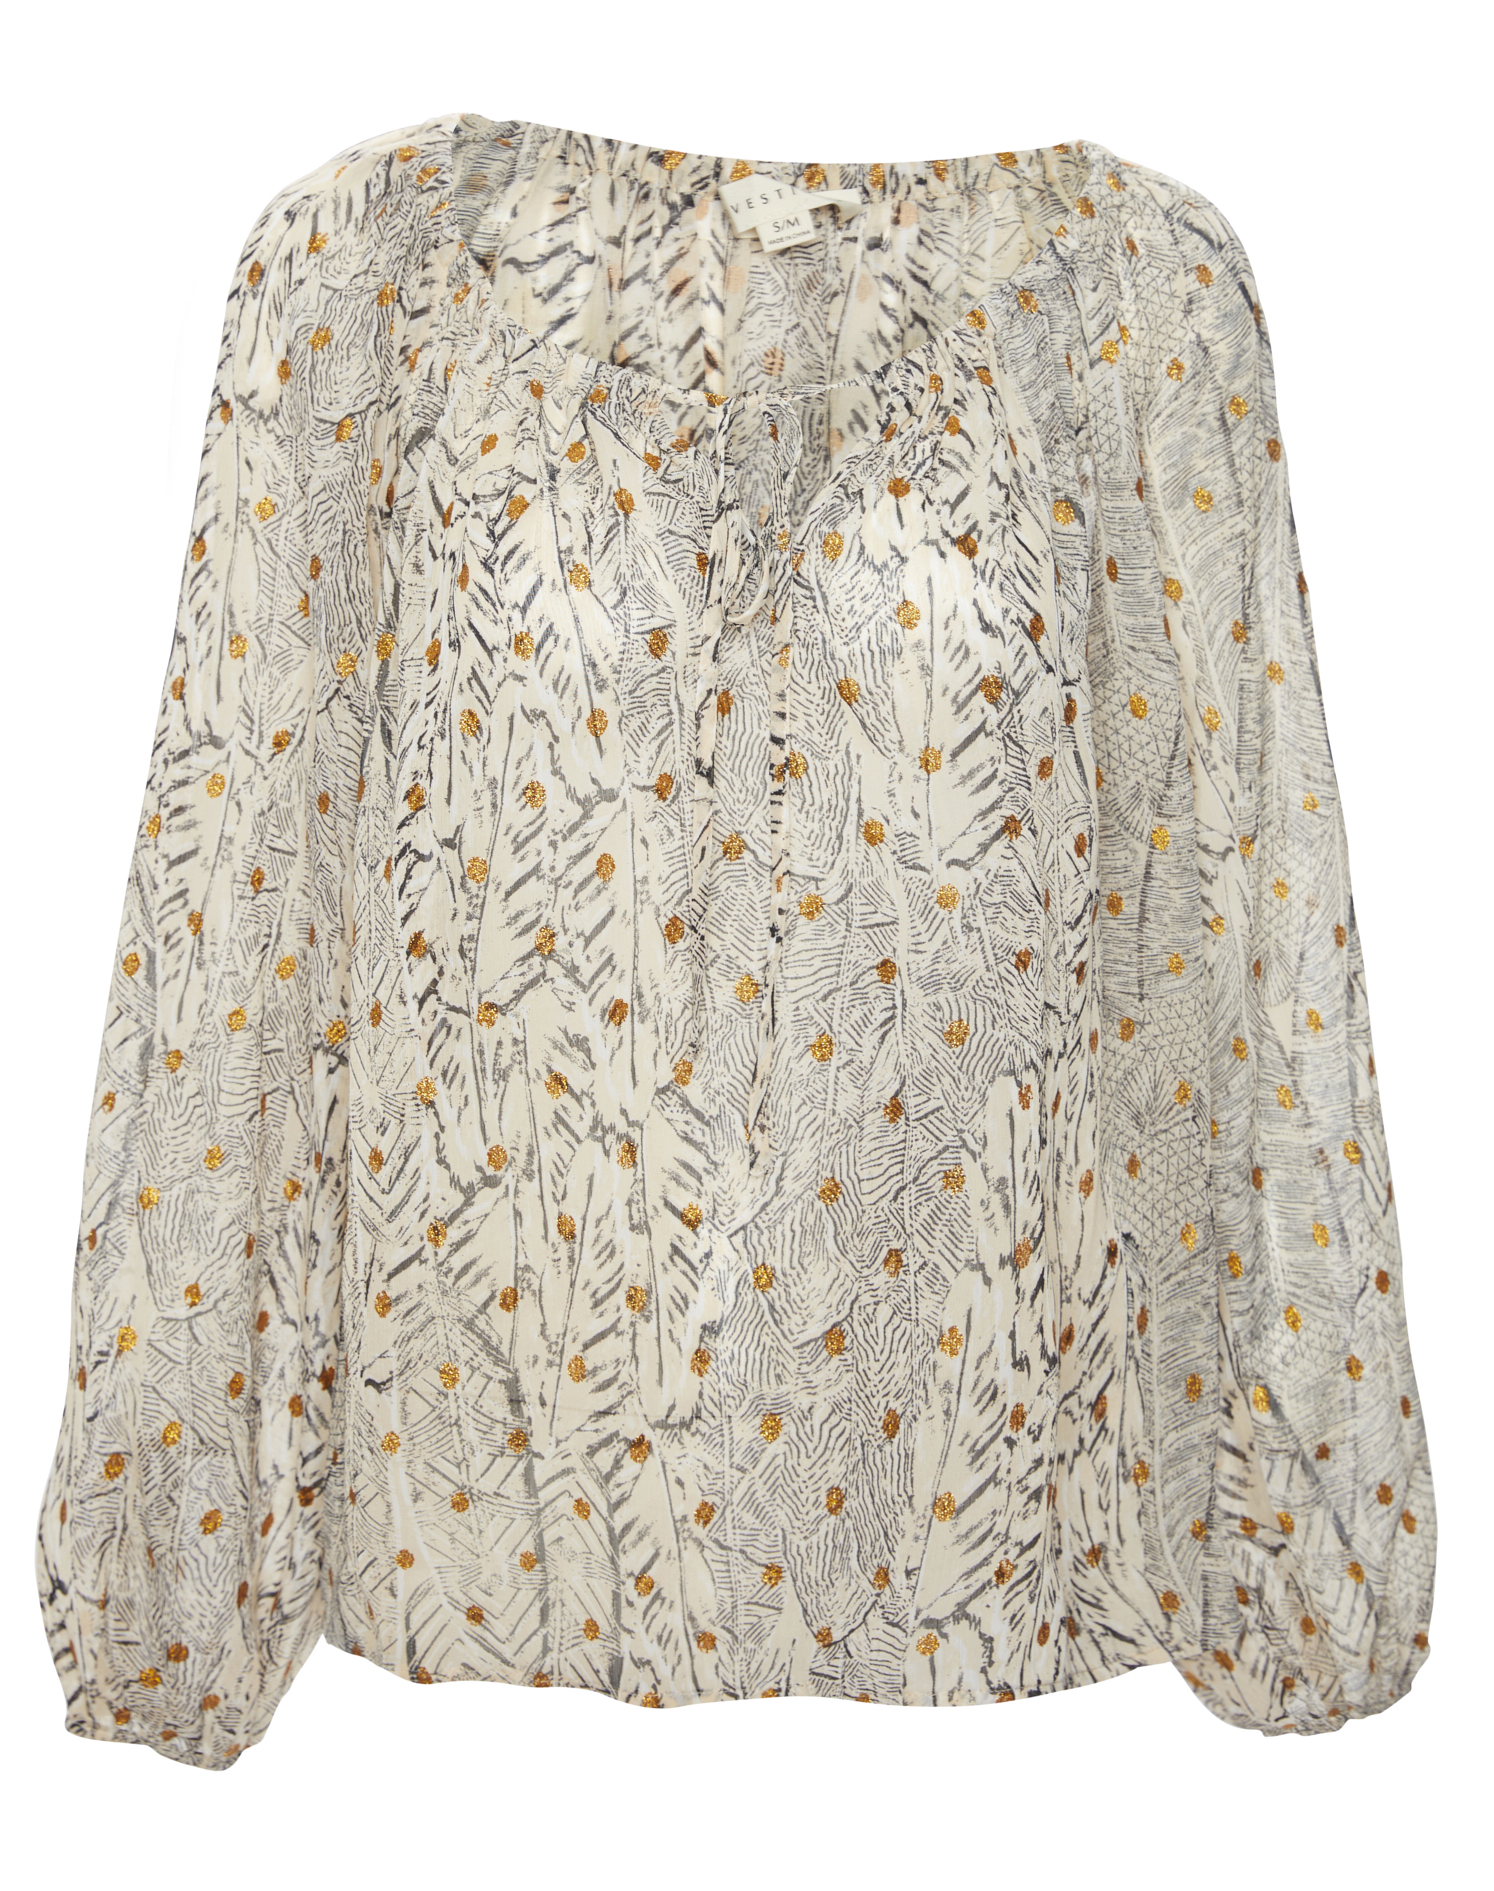 Feather Print Peasant Top